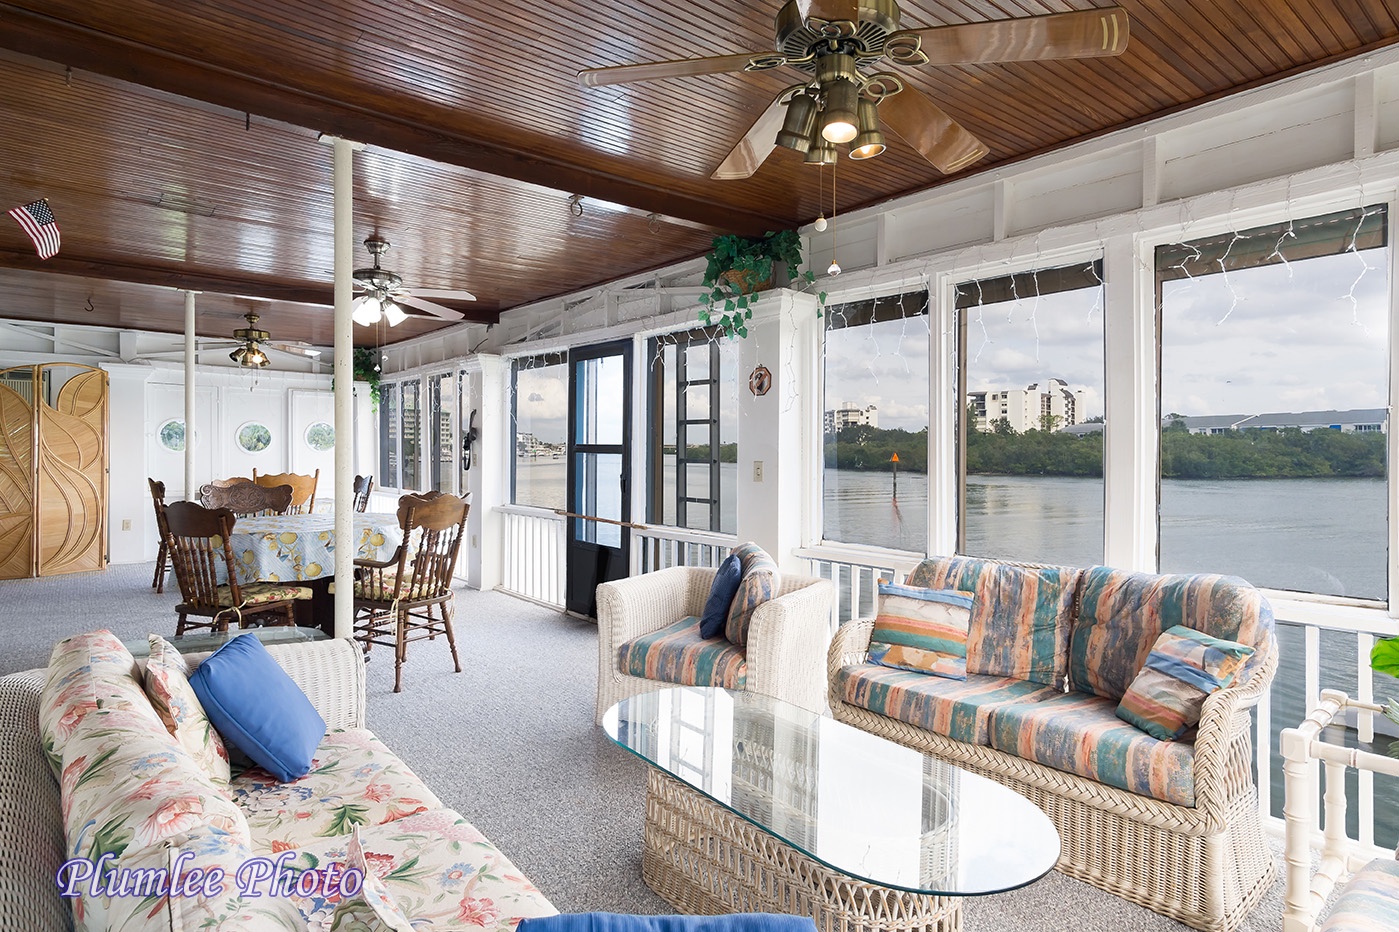 2nd Floor.  The Sunroom is a bright, open area with sweeping views of the Intracoastal Waterway.